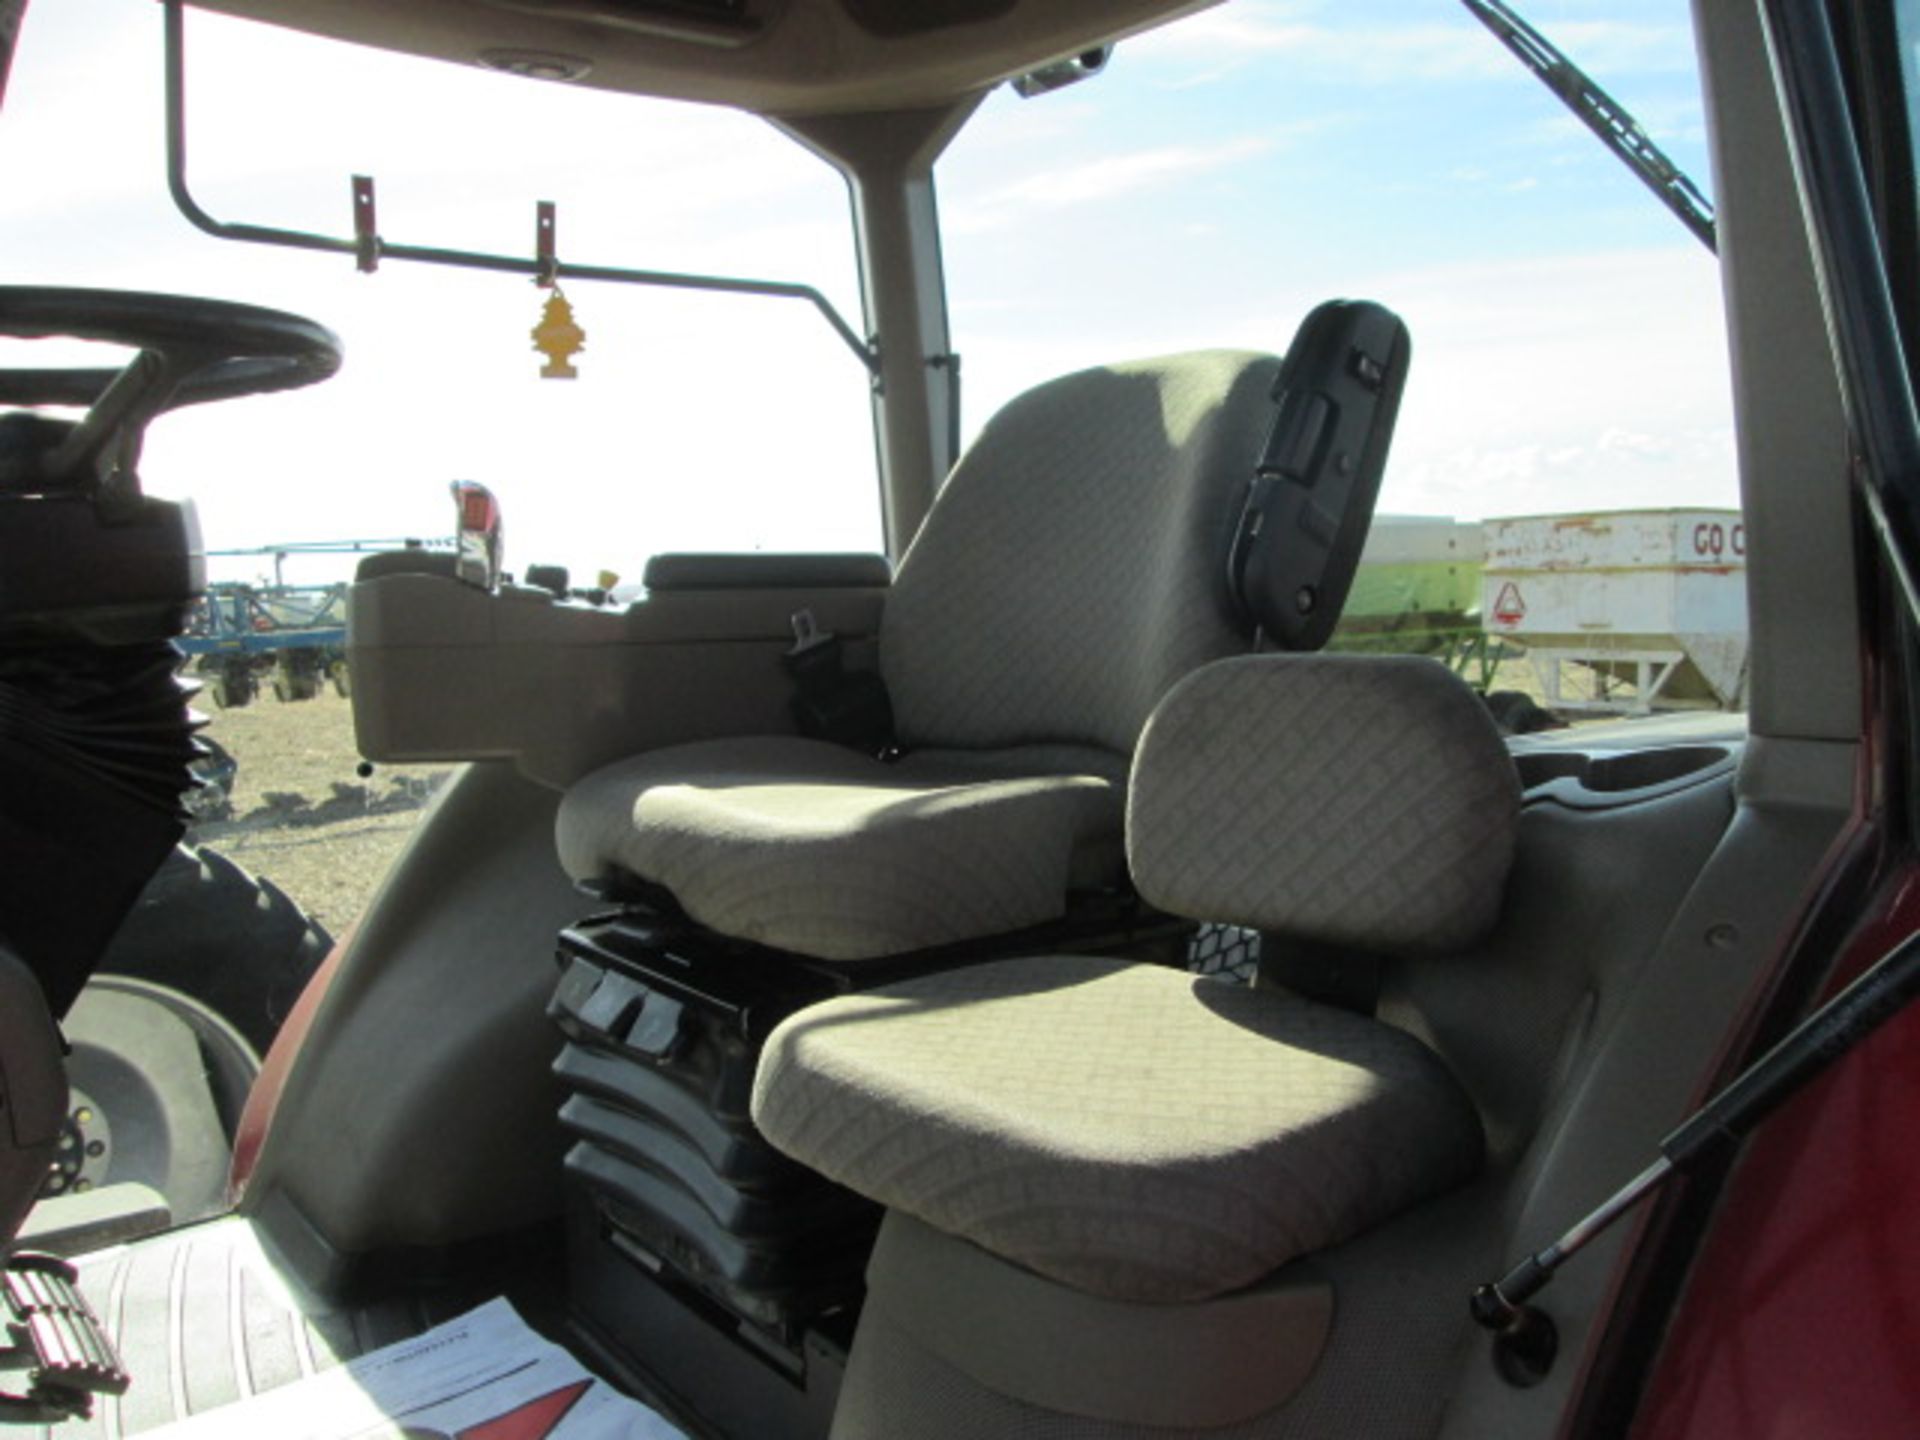 ’08 C-IH MAGNUM 245,480X46 DUALS, 4 HYDR, 3474 HRS - Image 14 of 18